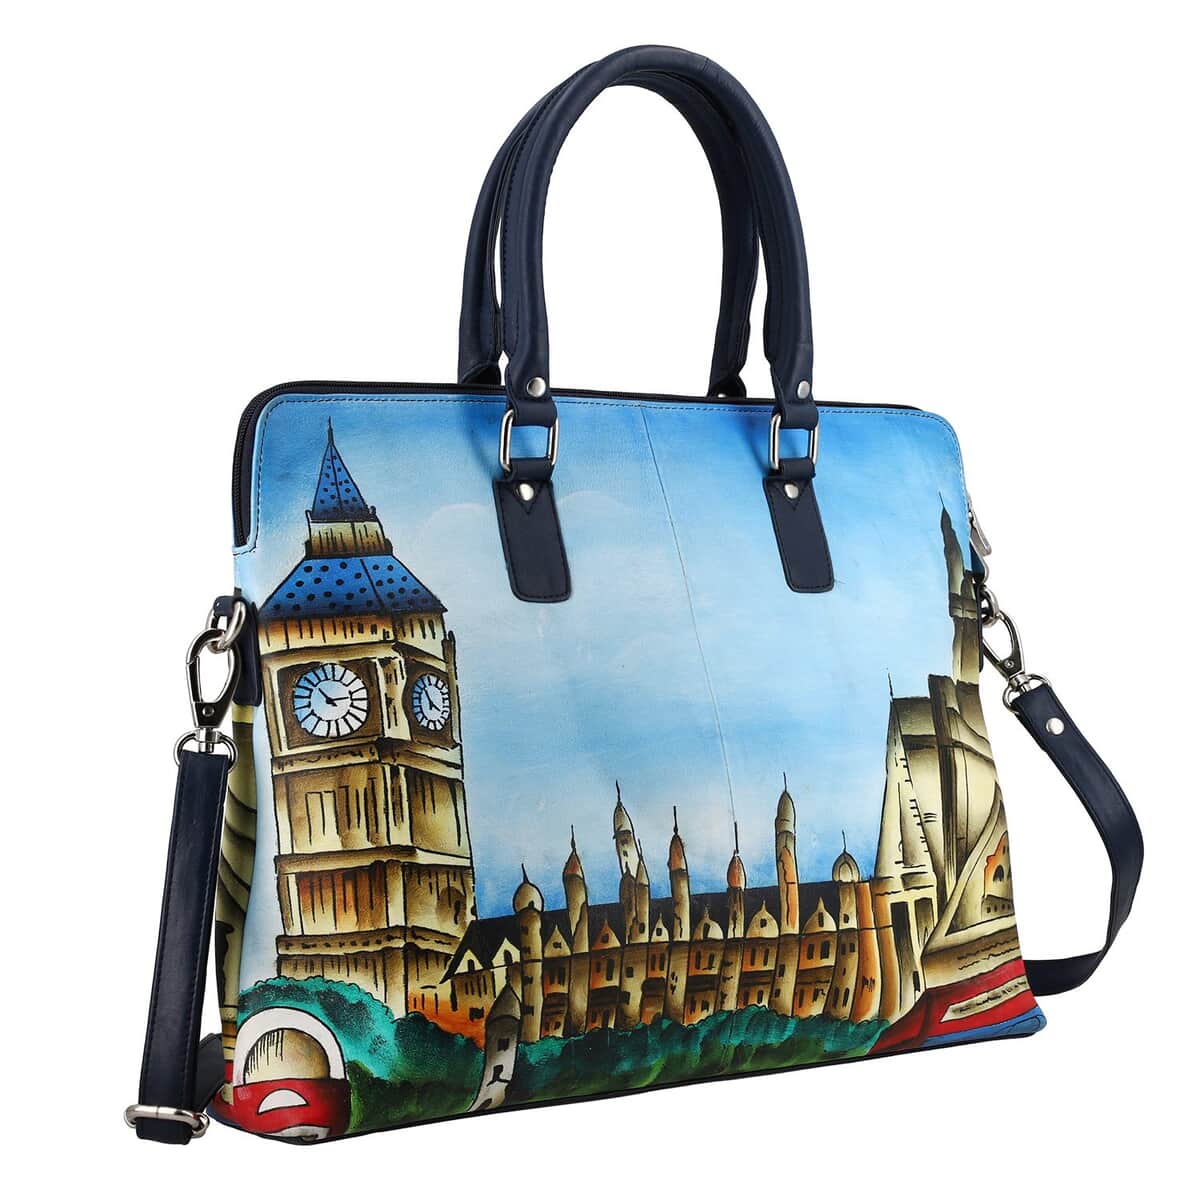 "SUKRITI 100% Genuine Leather Ladies Shoulder Tote Bag (Theme: London City Clock Tower View) Color: Blue Size: 16.5(L)x12.5(H)x3(W) inches" image number 3